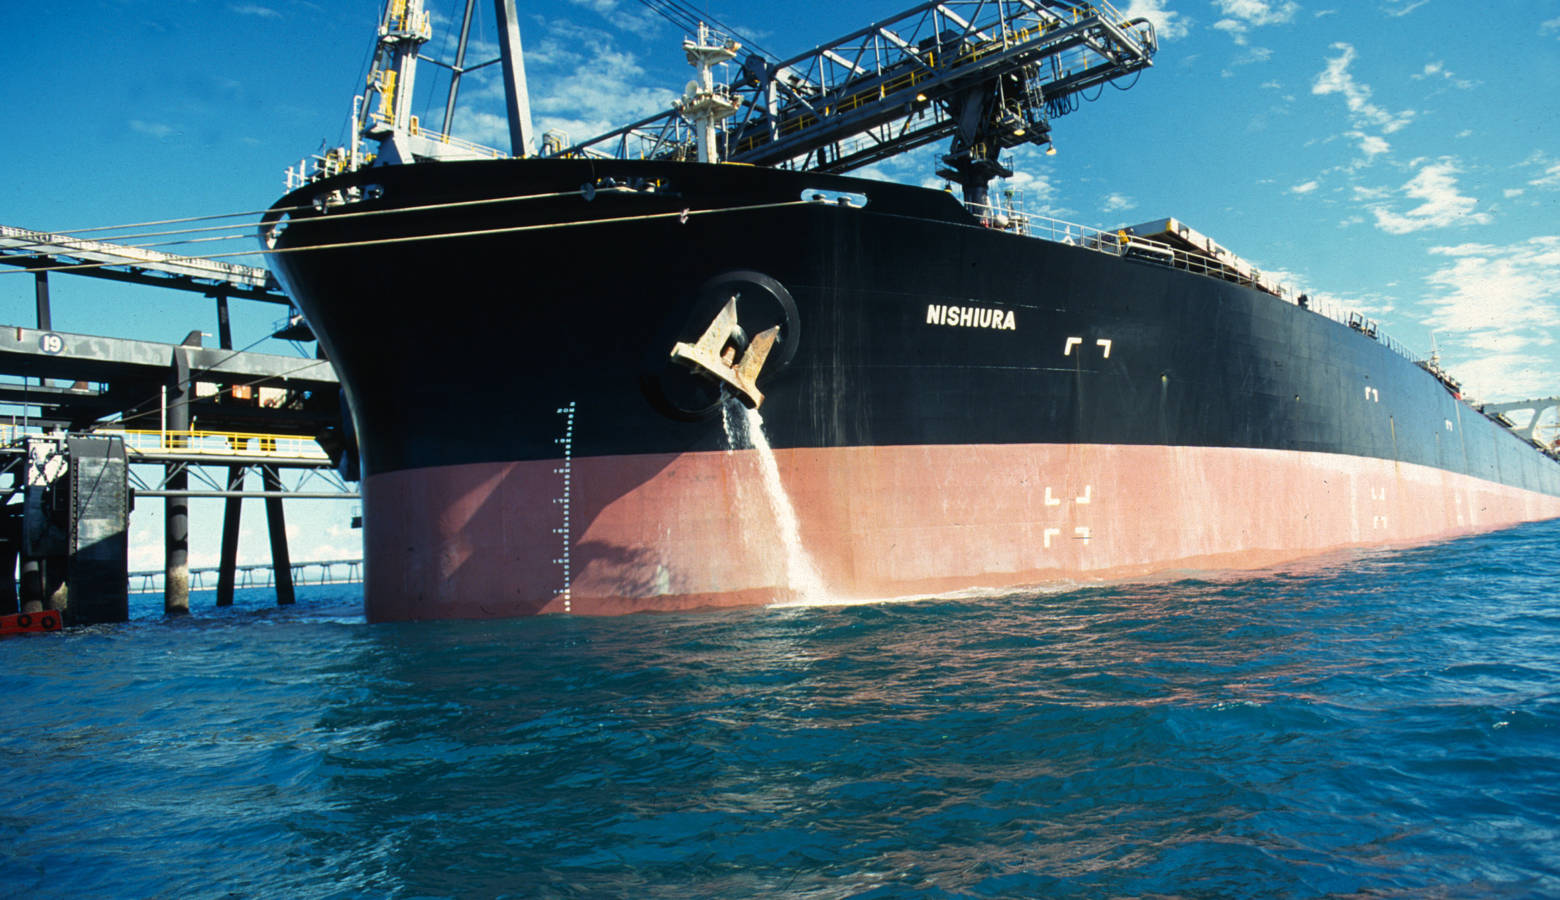 A carrier ship releasing ballast water in the 1990's (CSIRO/Wikimedia Commons)